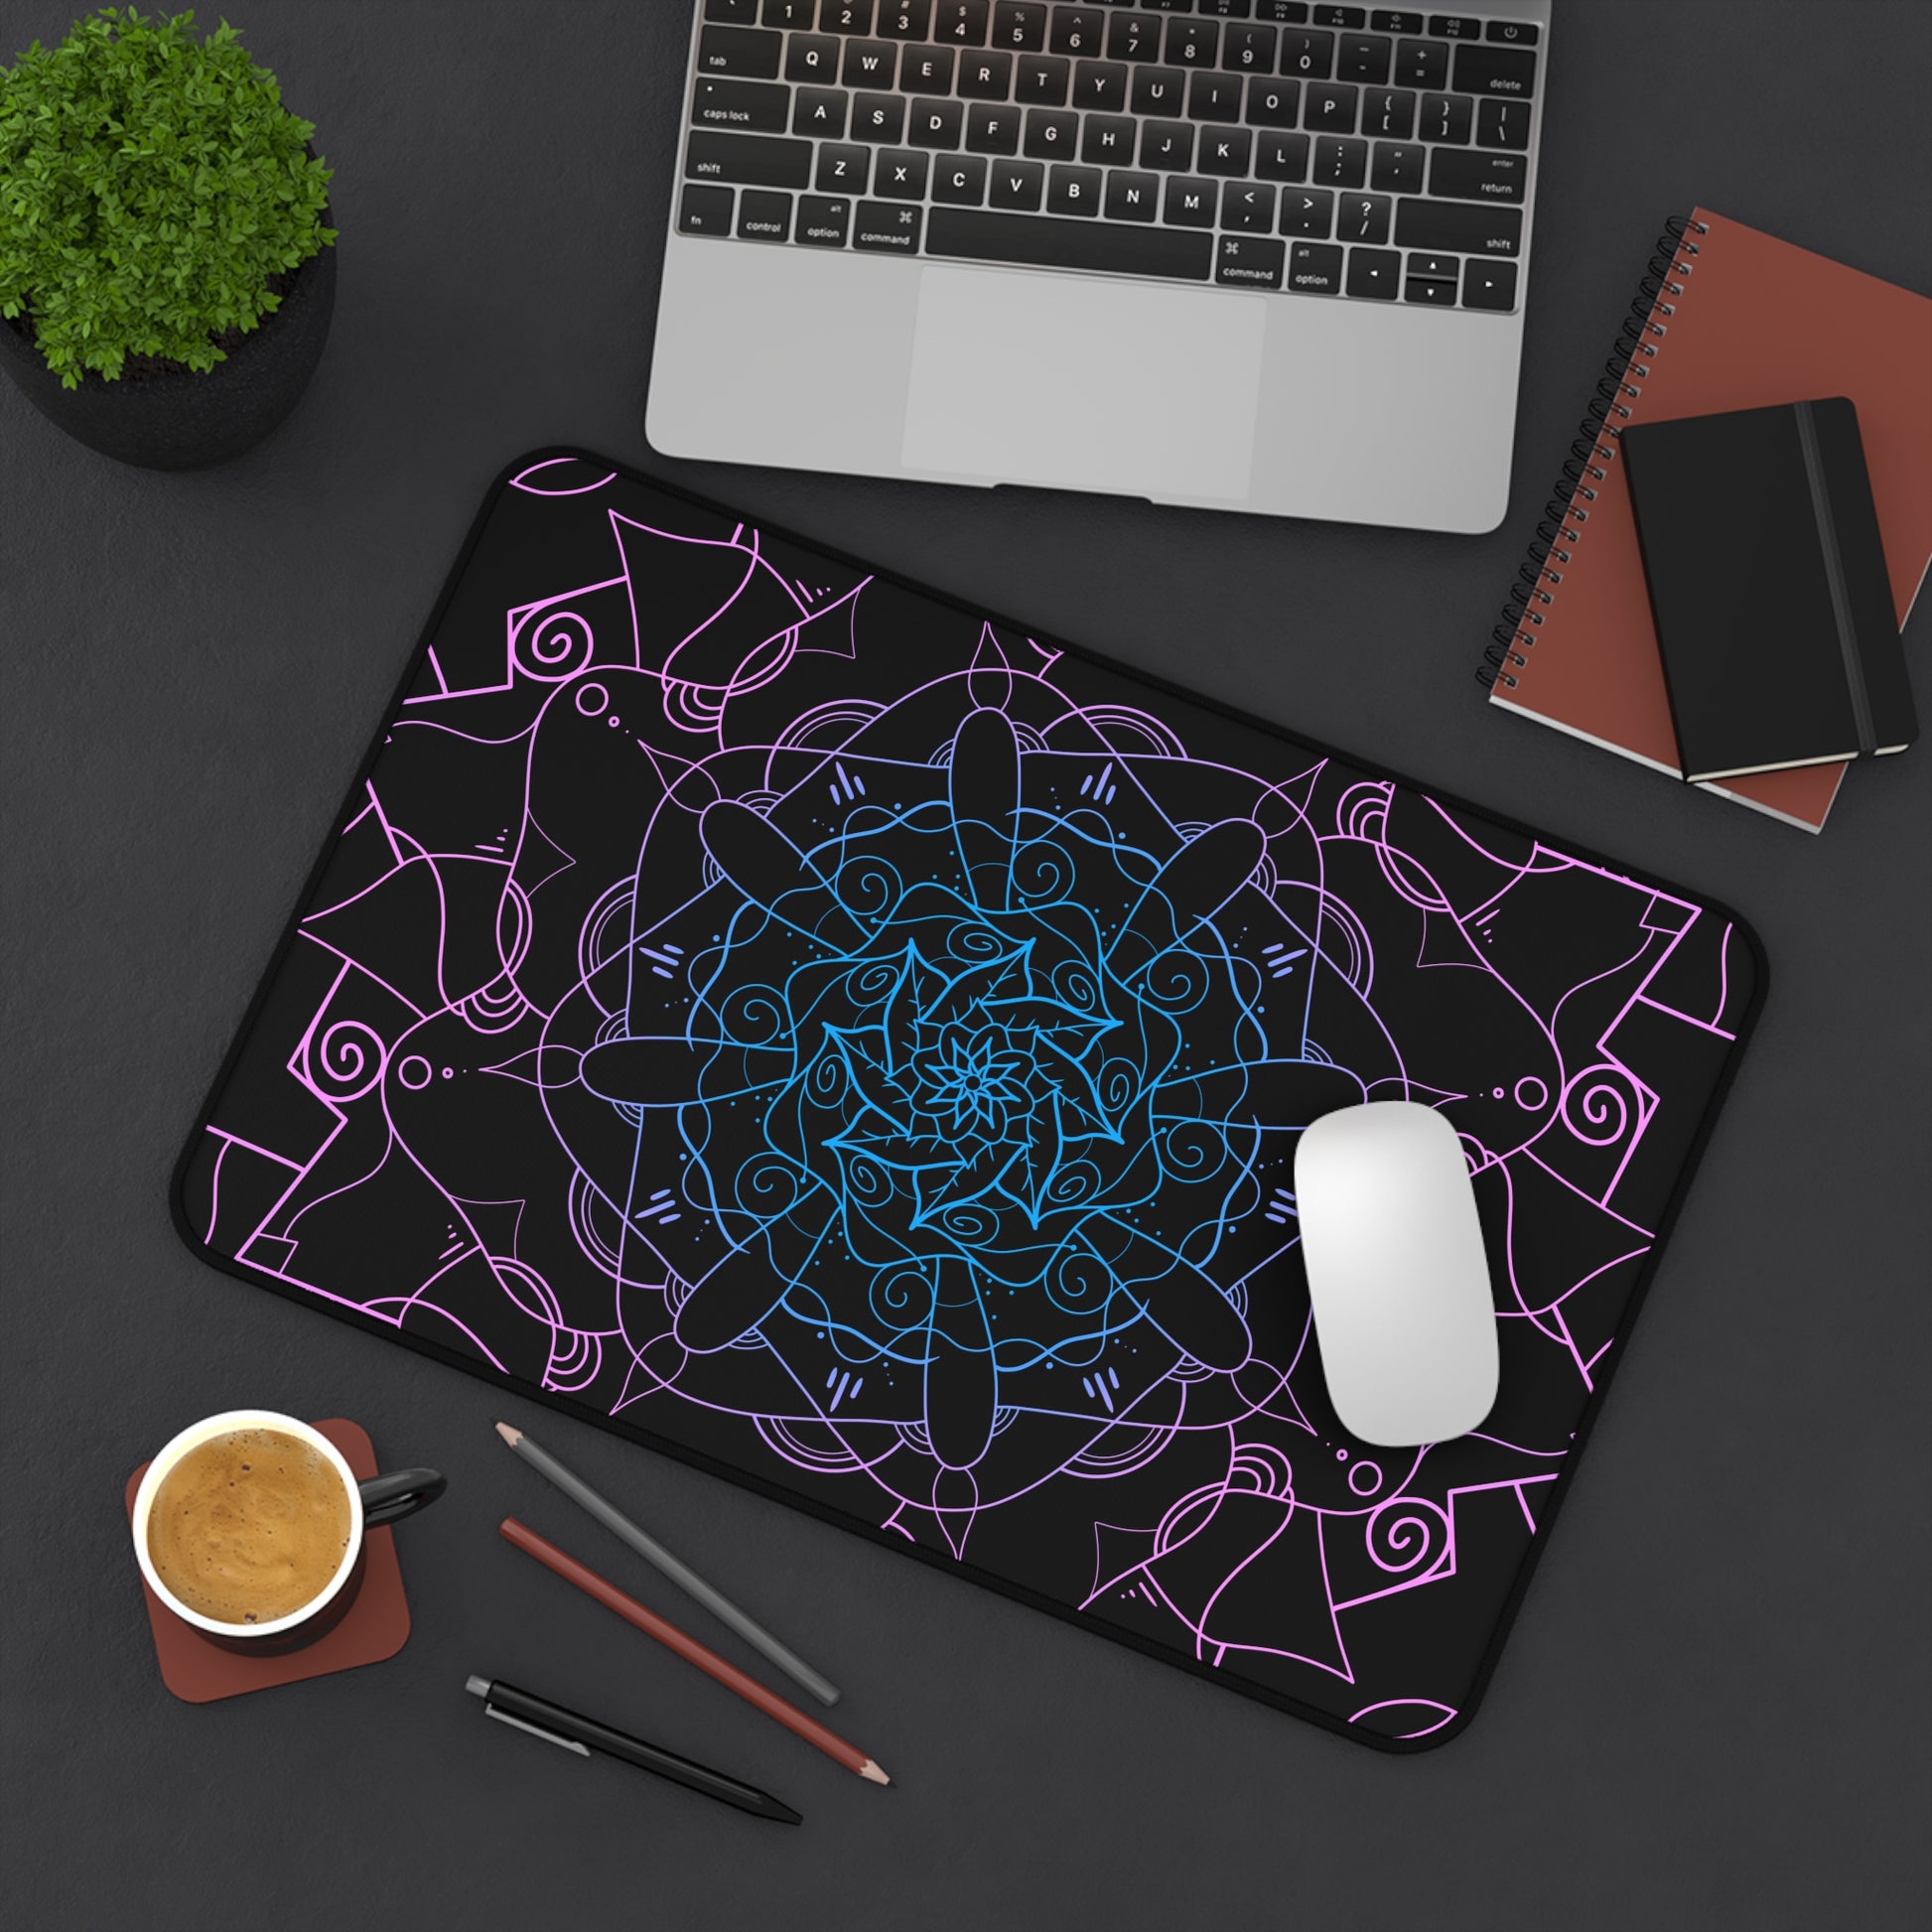 A 12" x 18" desk mat with a pink and blue mandala pattern on a black background sitting at an angle.